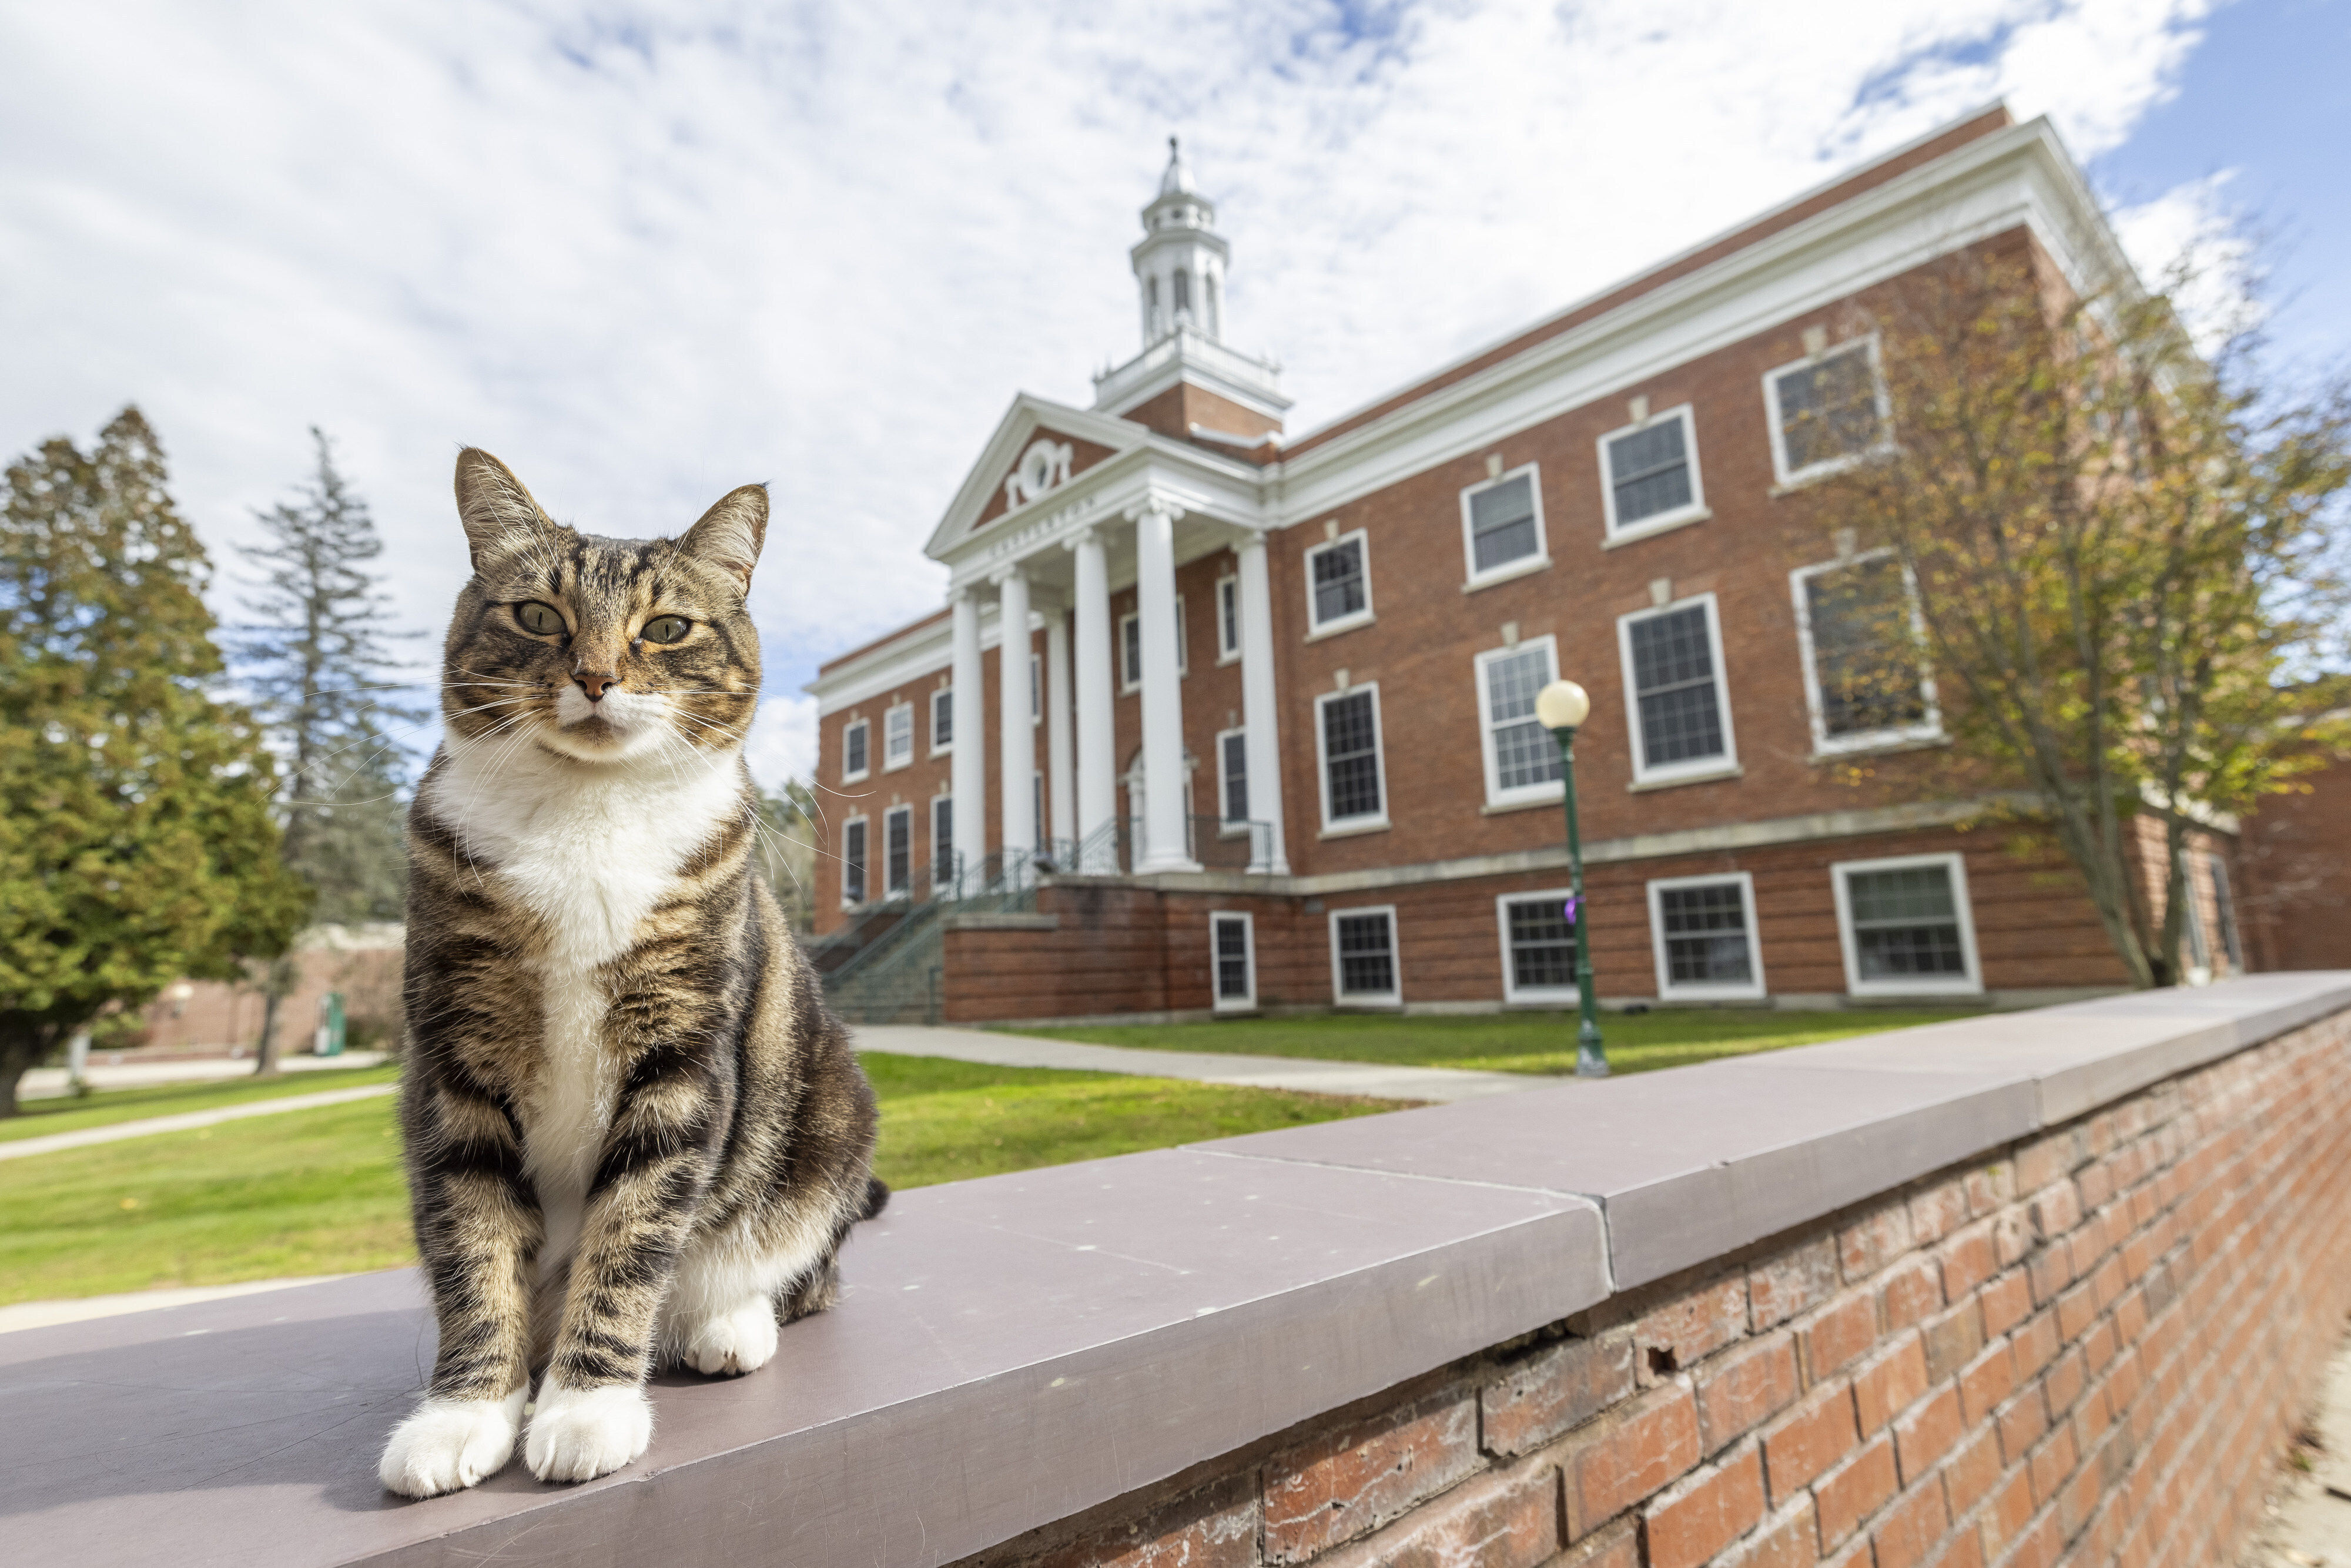 Max the cat stands in front of Woodruff Hall at Vermont State University Castleton in October. Photo: Vermont State University via AP